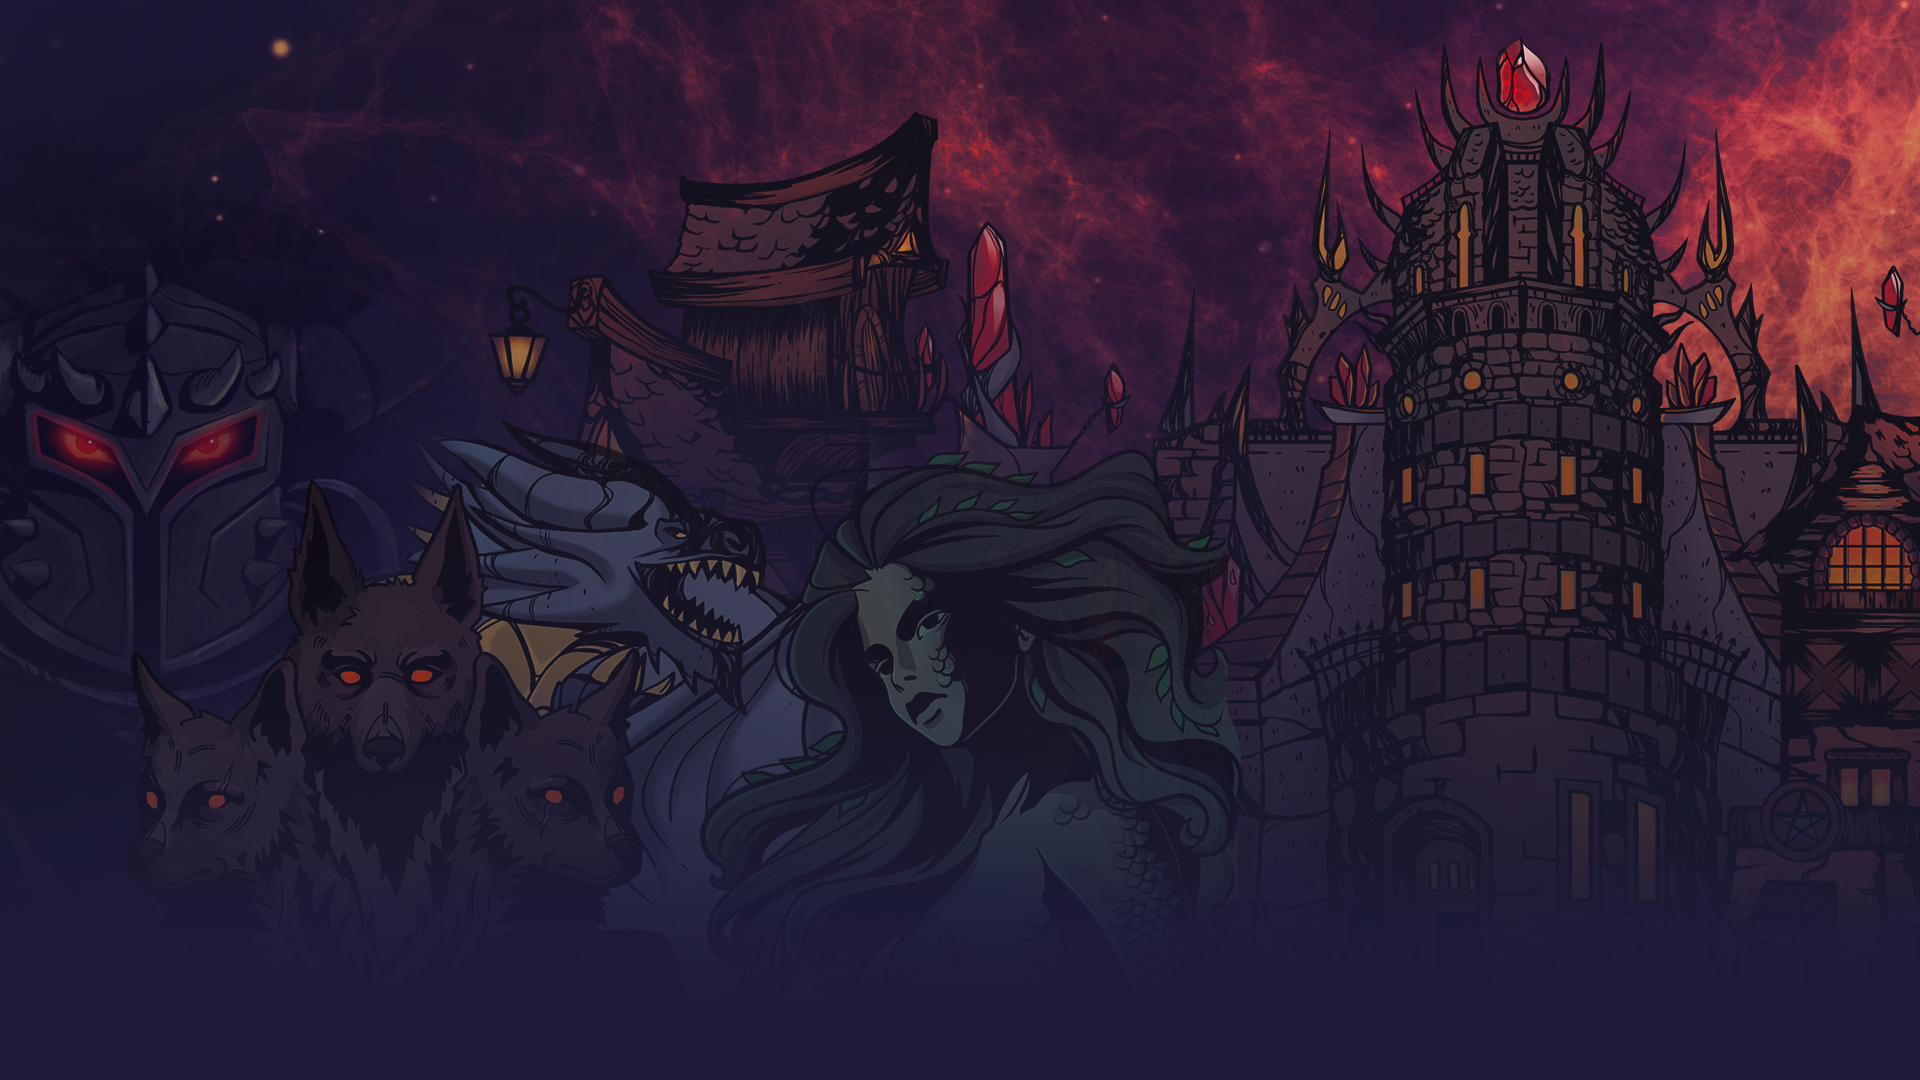 Artwork for Dark Lord. In the background is a castle's turret. In the foreground are a person with an iron helmet/mask, a three-headed dog, a dragon from the neck up, and a woman with long hair and scales for skin.